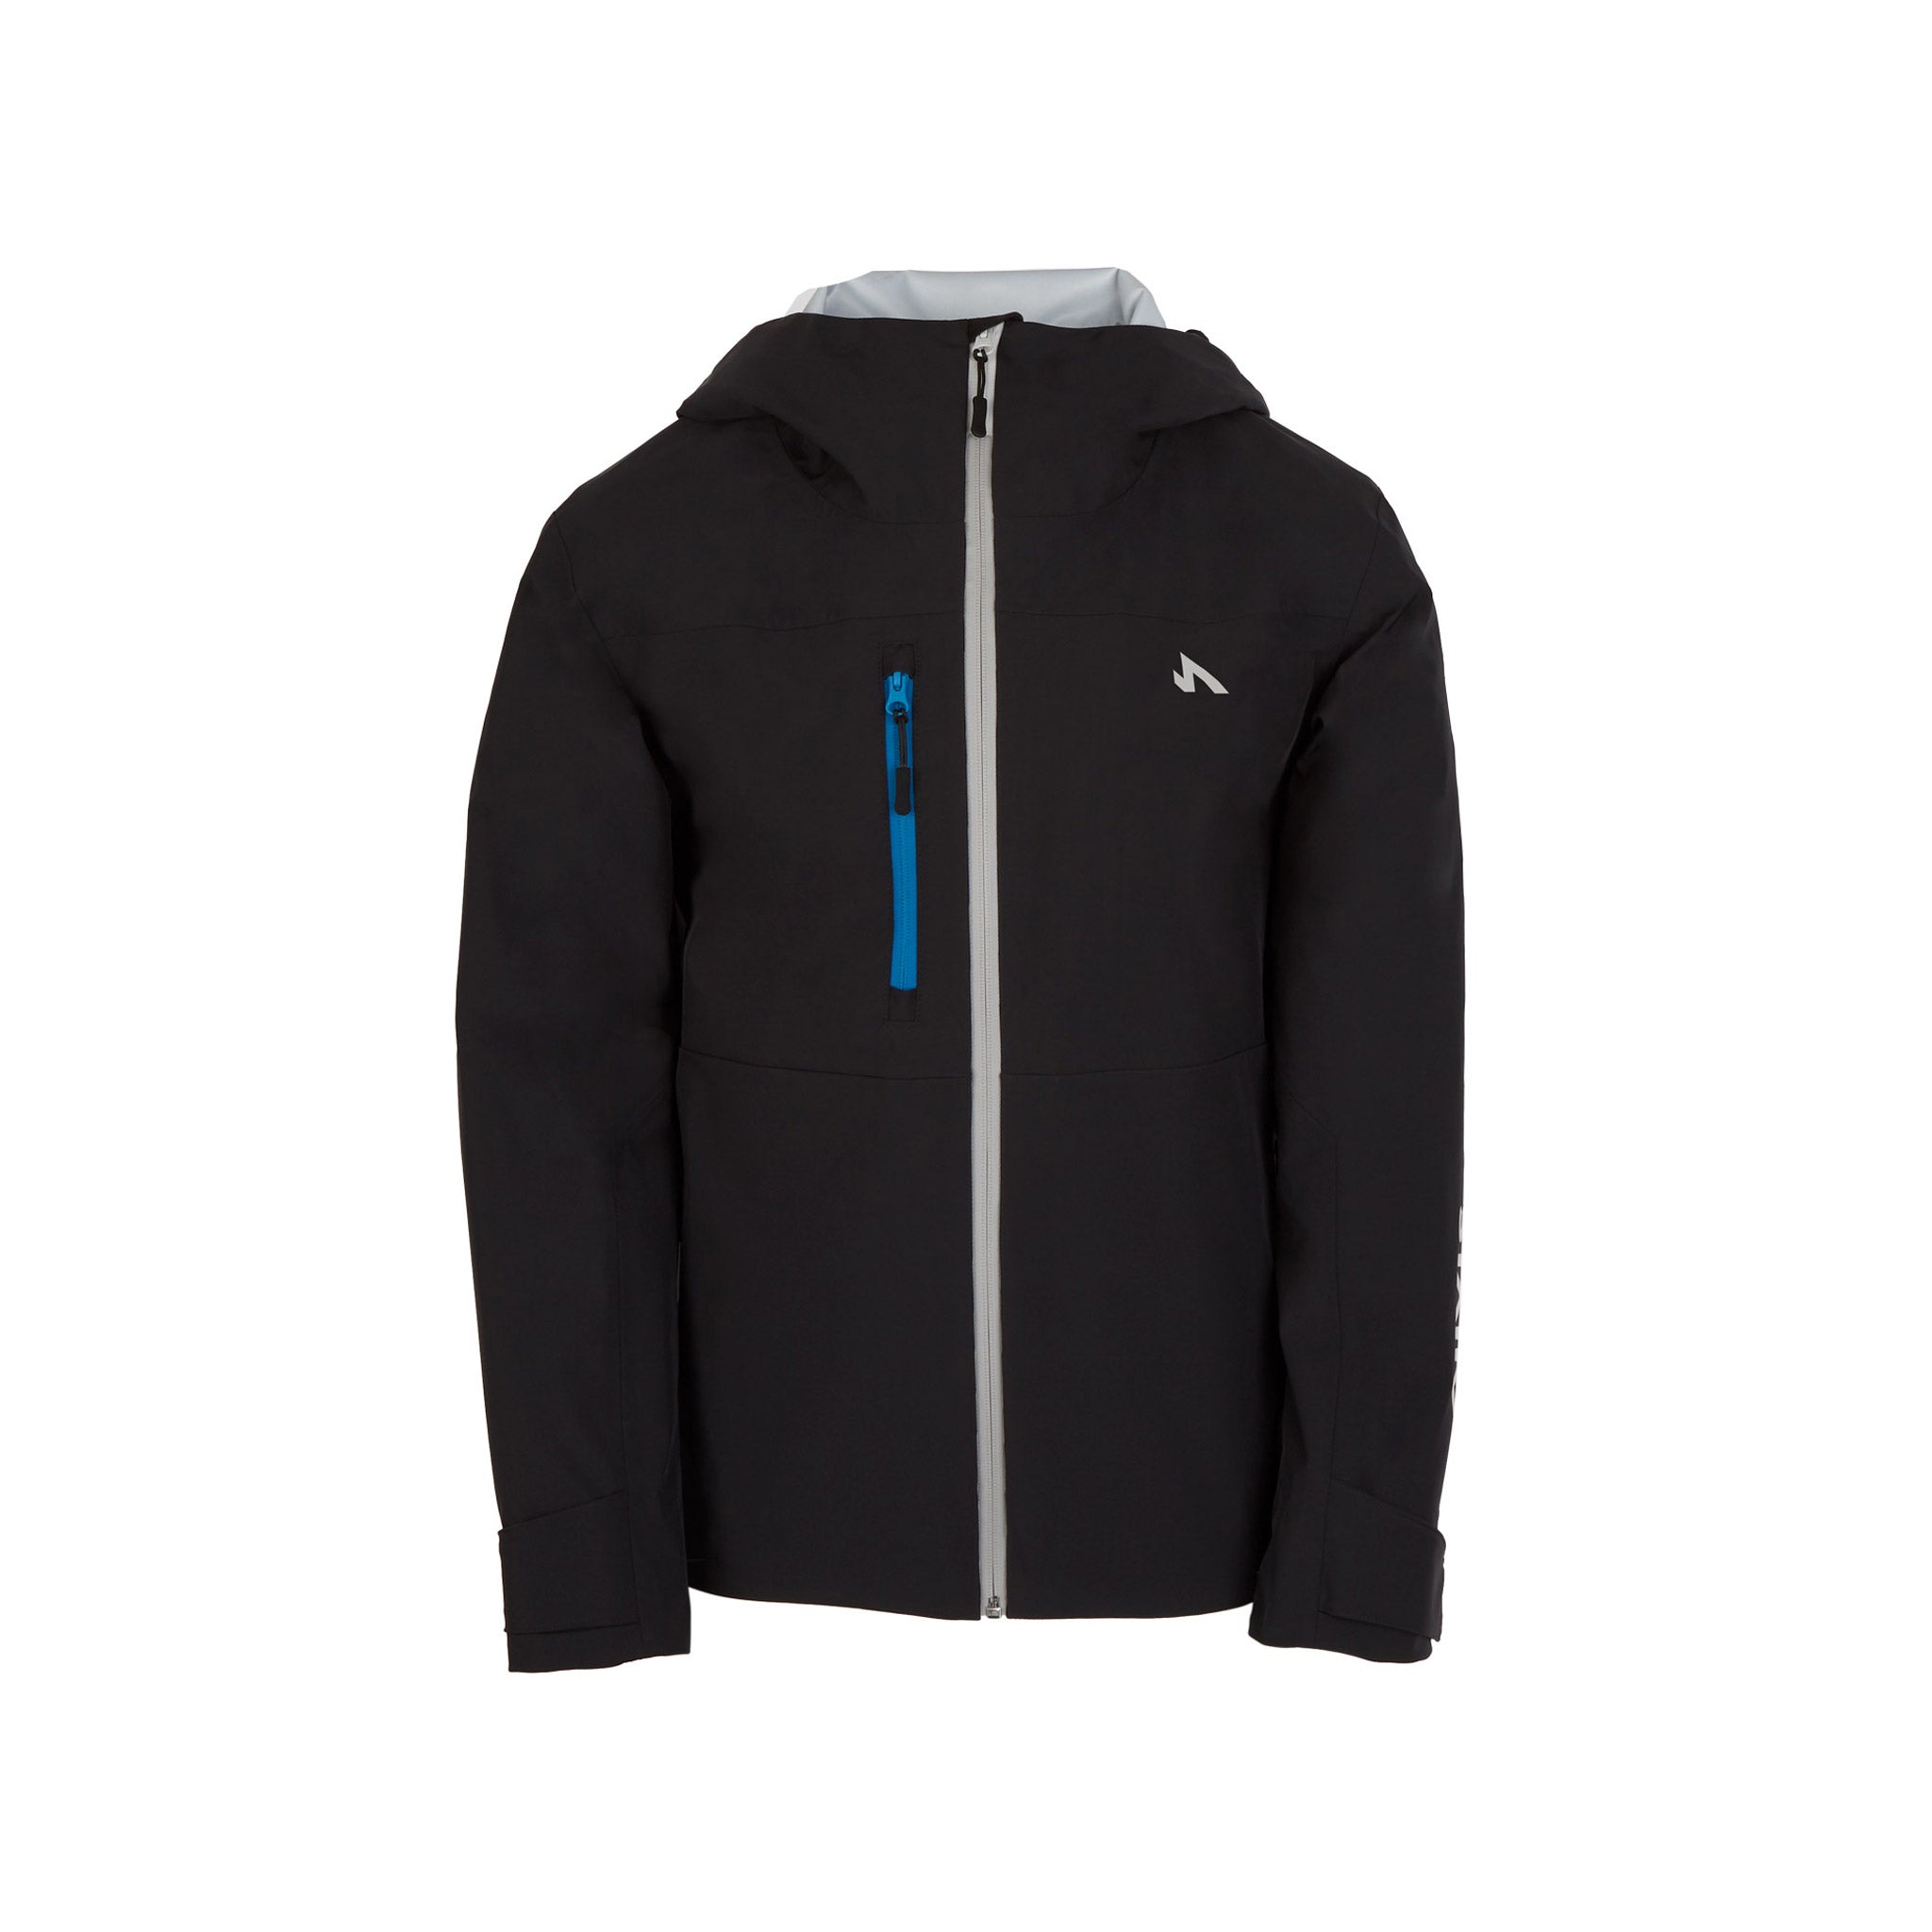 The Protego Shell Ski Jacket in Black